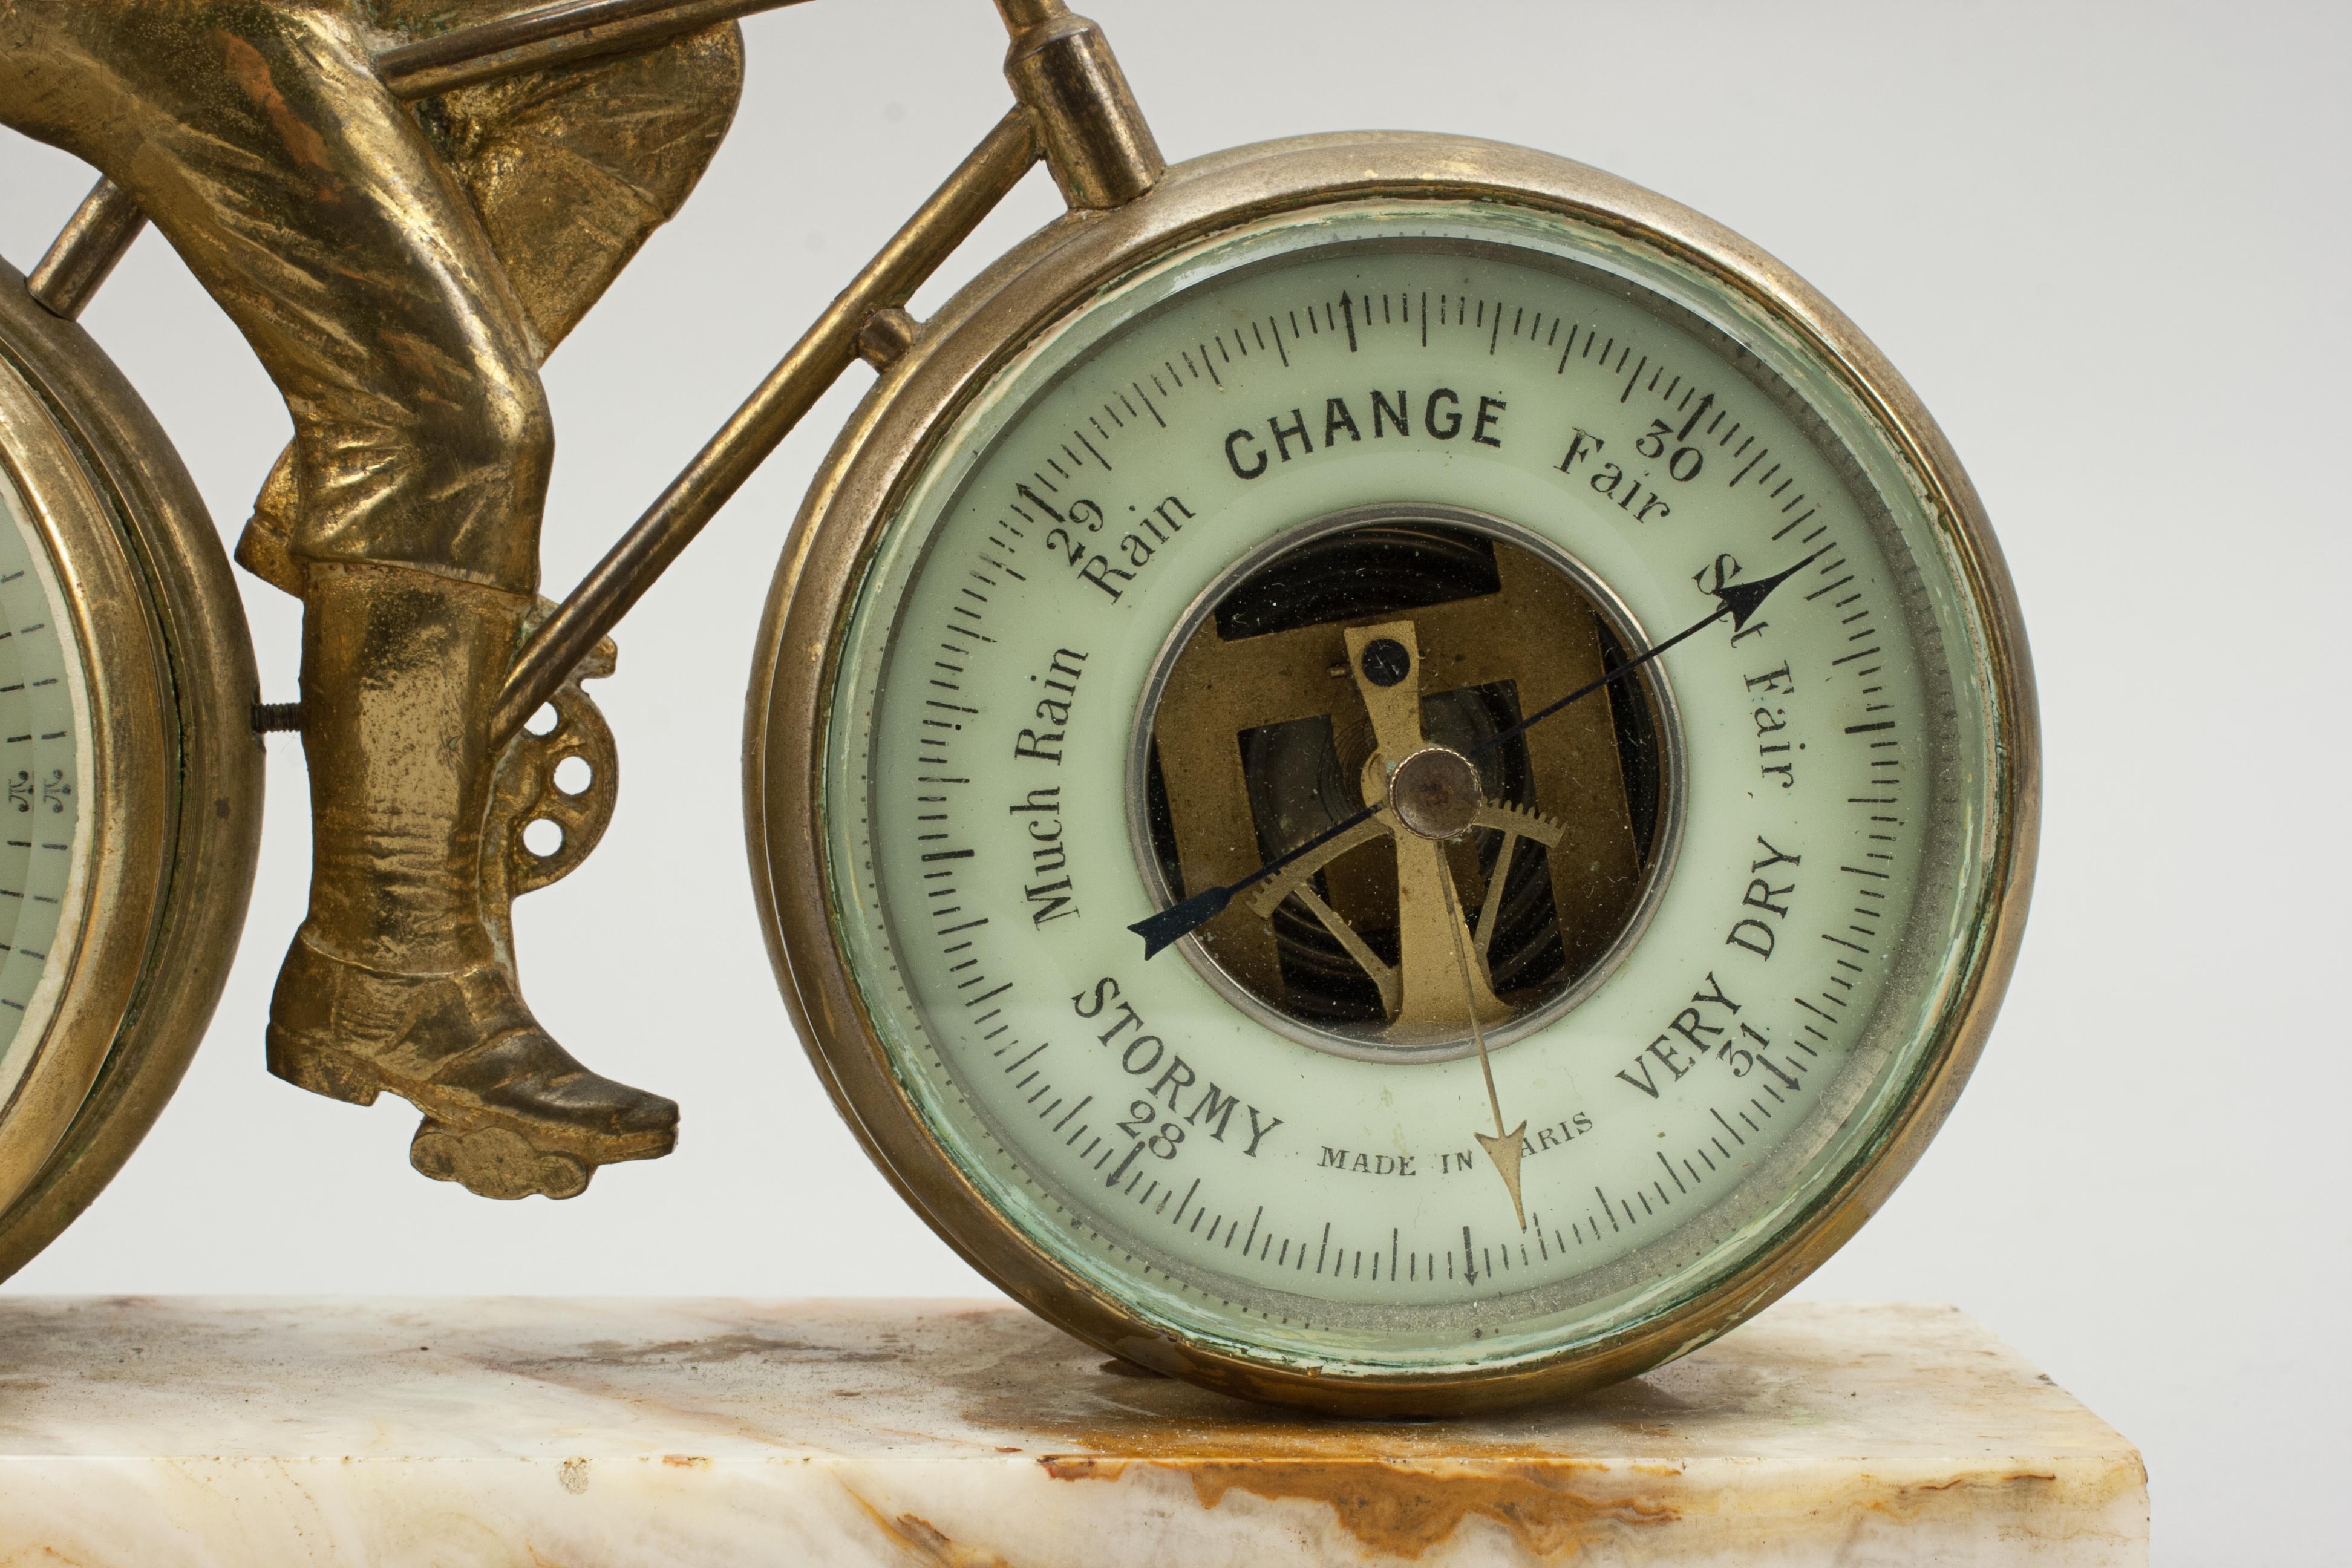 Antique cycling clock, Barometer.
A rare and very unusual late 19th century novelty bicycle clock and barometer mounted on a marble base. The gilt-brass bike has a 3